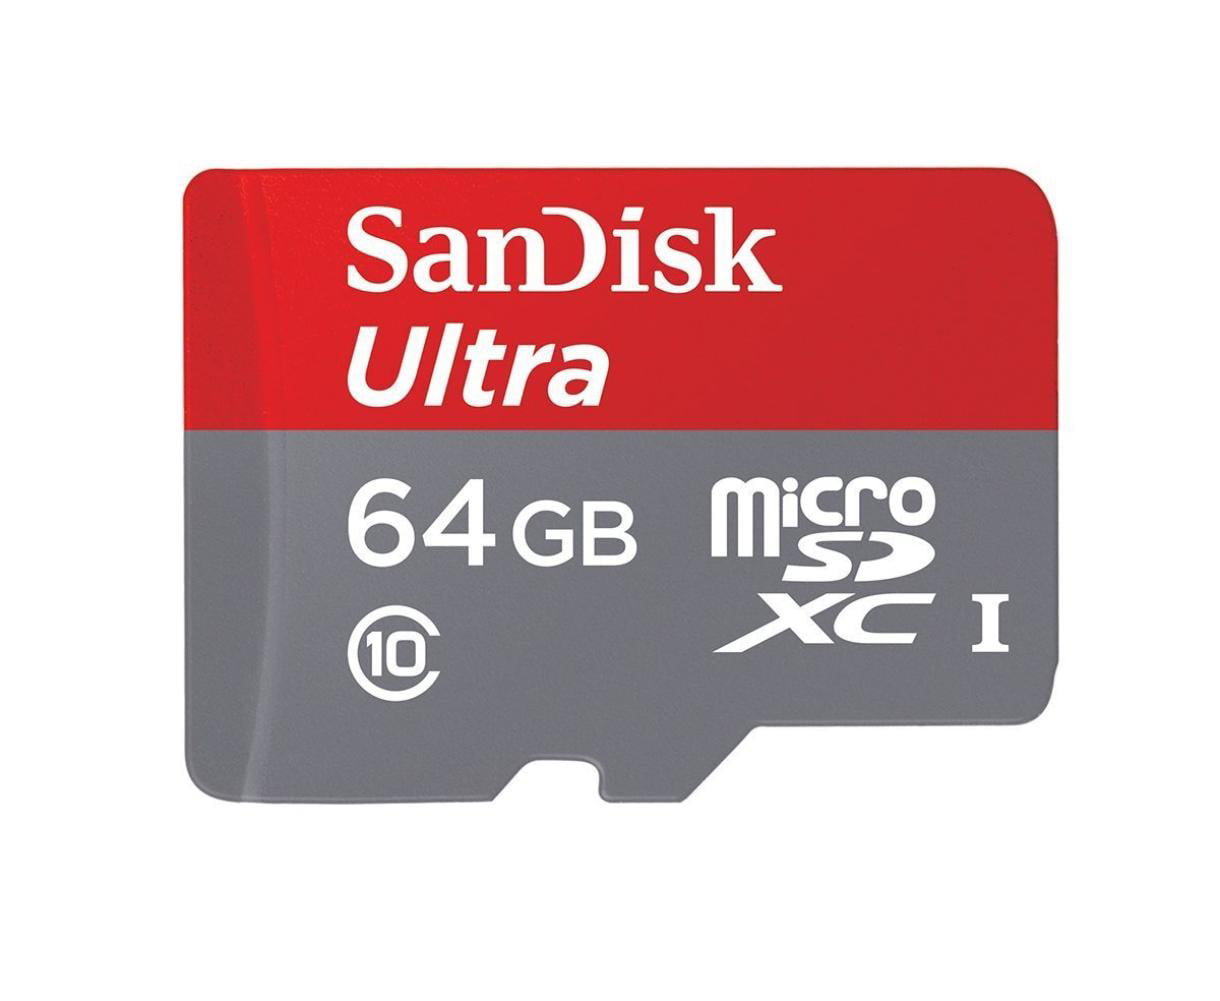 SanDisk Ultra Plus 32GB microSDHC UHS-I Card with Adapter SDSQUP-032G-AW46A NEW 